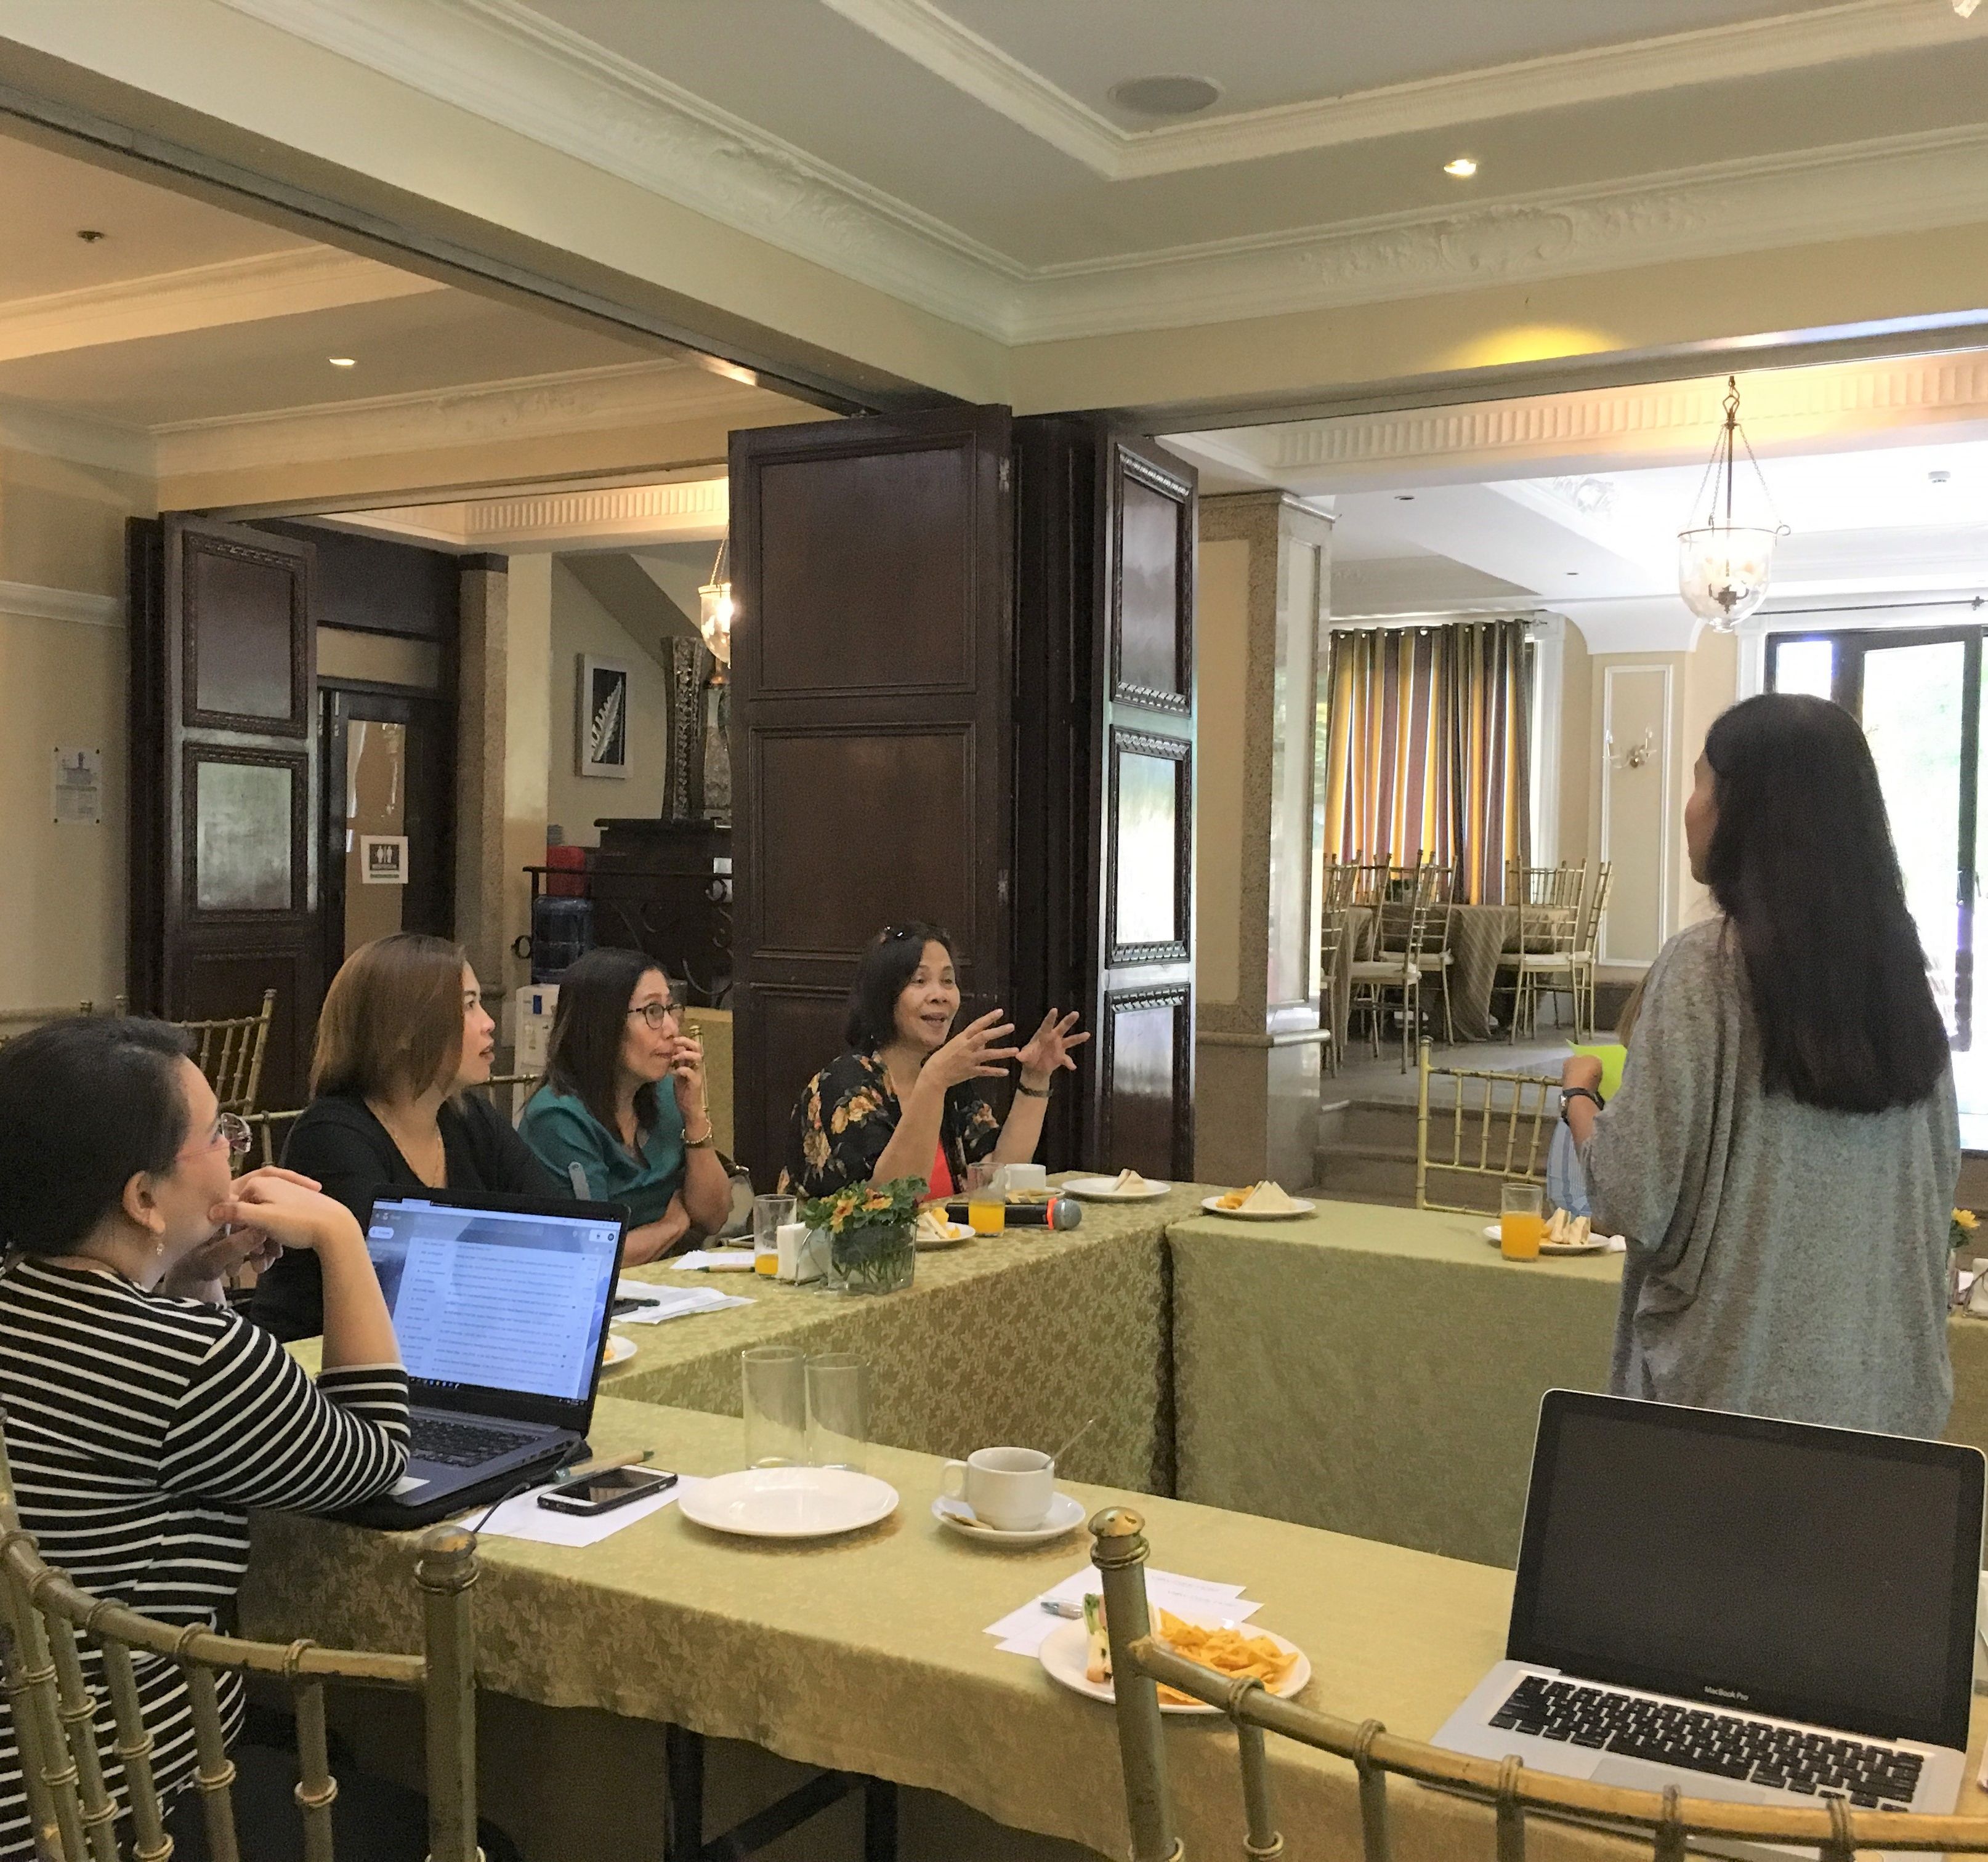 <h1>Policy Planning with Tagaytay City LGU</h1>
<p>Last June 11, 2019, World Wide Fund for Nature (WWF) Philippines’ The Sustainable Diner: A Key Ingredient for Sustainable </p>
<p style="text-align: right;"><a href="https://support.wwf.org.ph/what-we-do/food/thesustainablediner/policy-planning-tagaytay-city-lgu/">Read More &gt;</a></p>